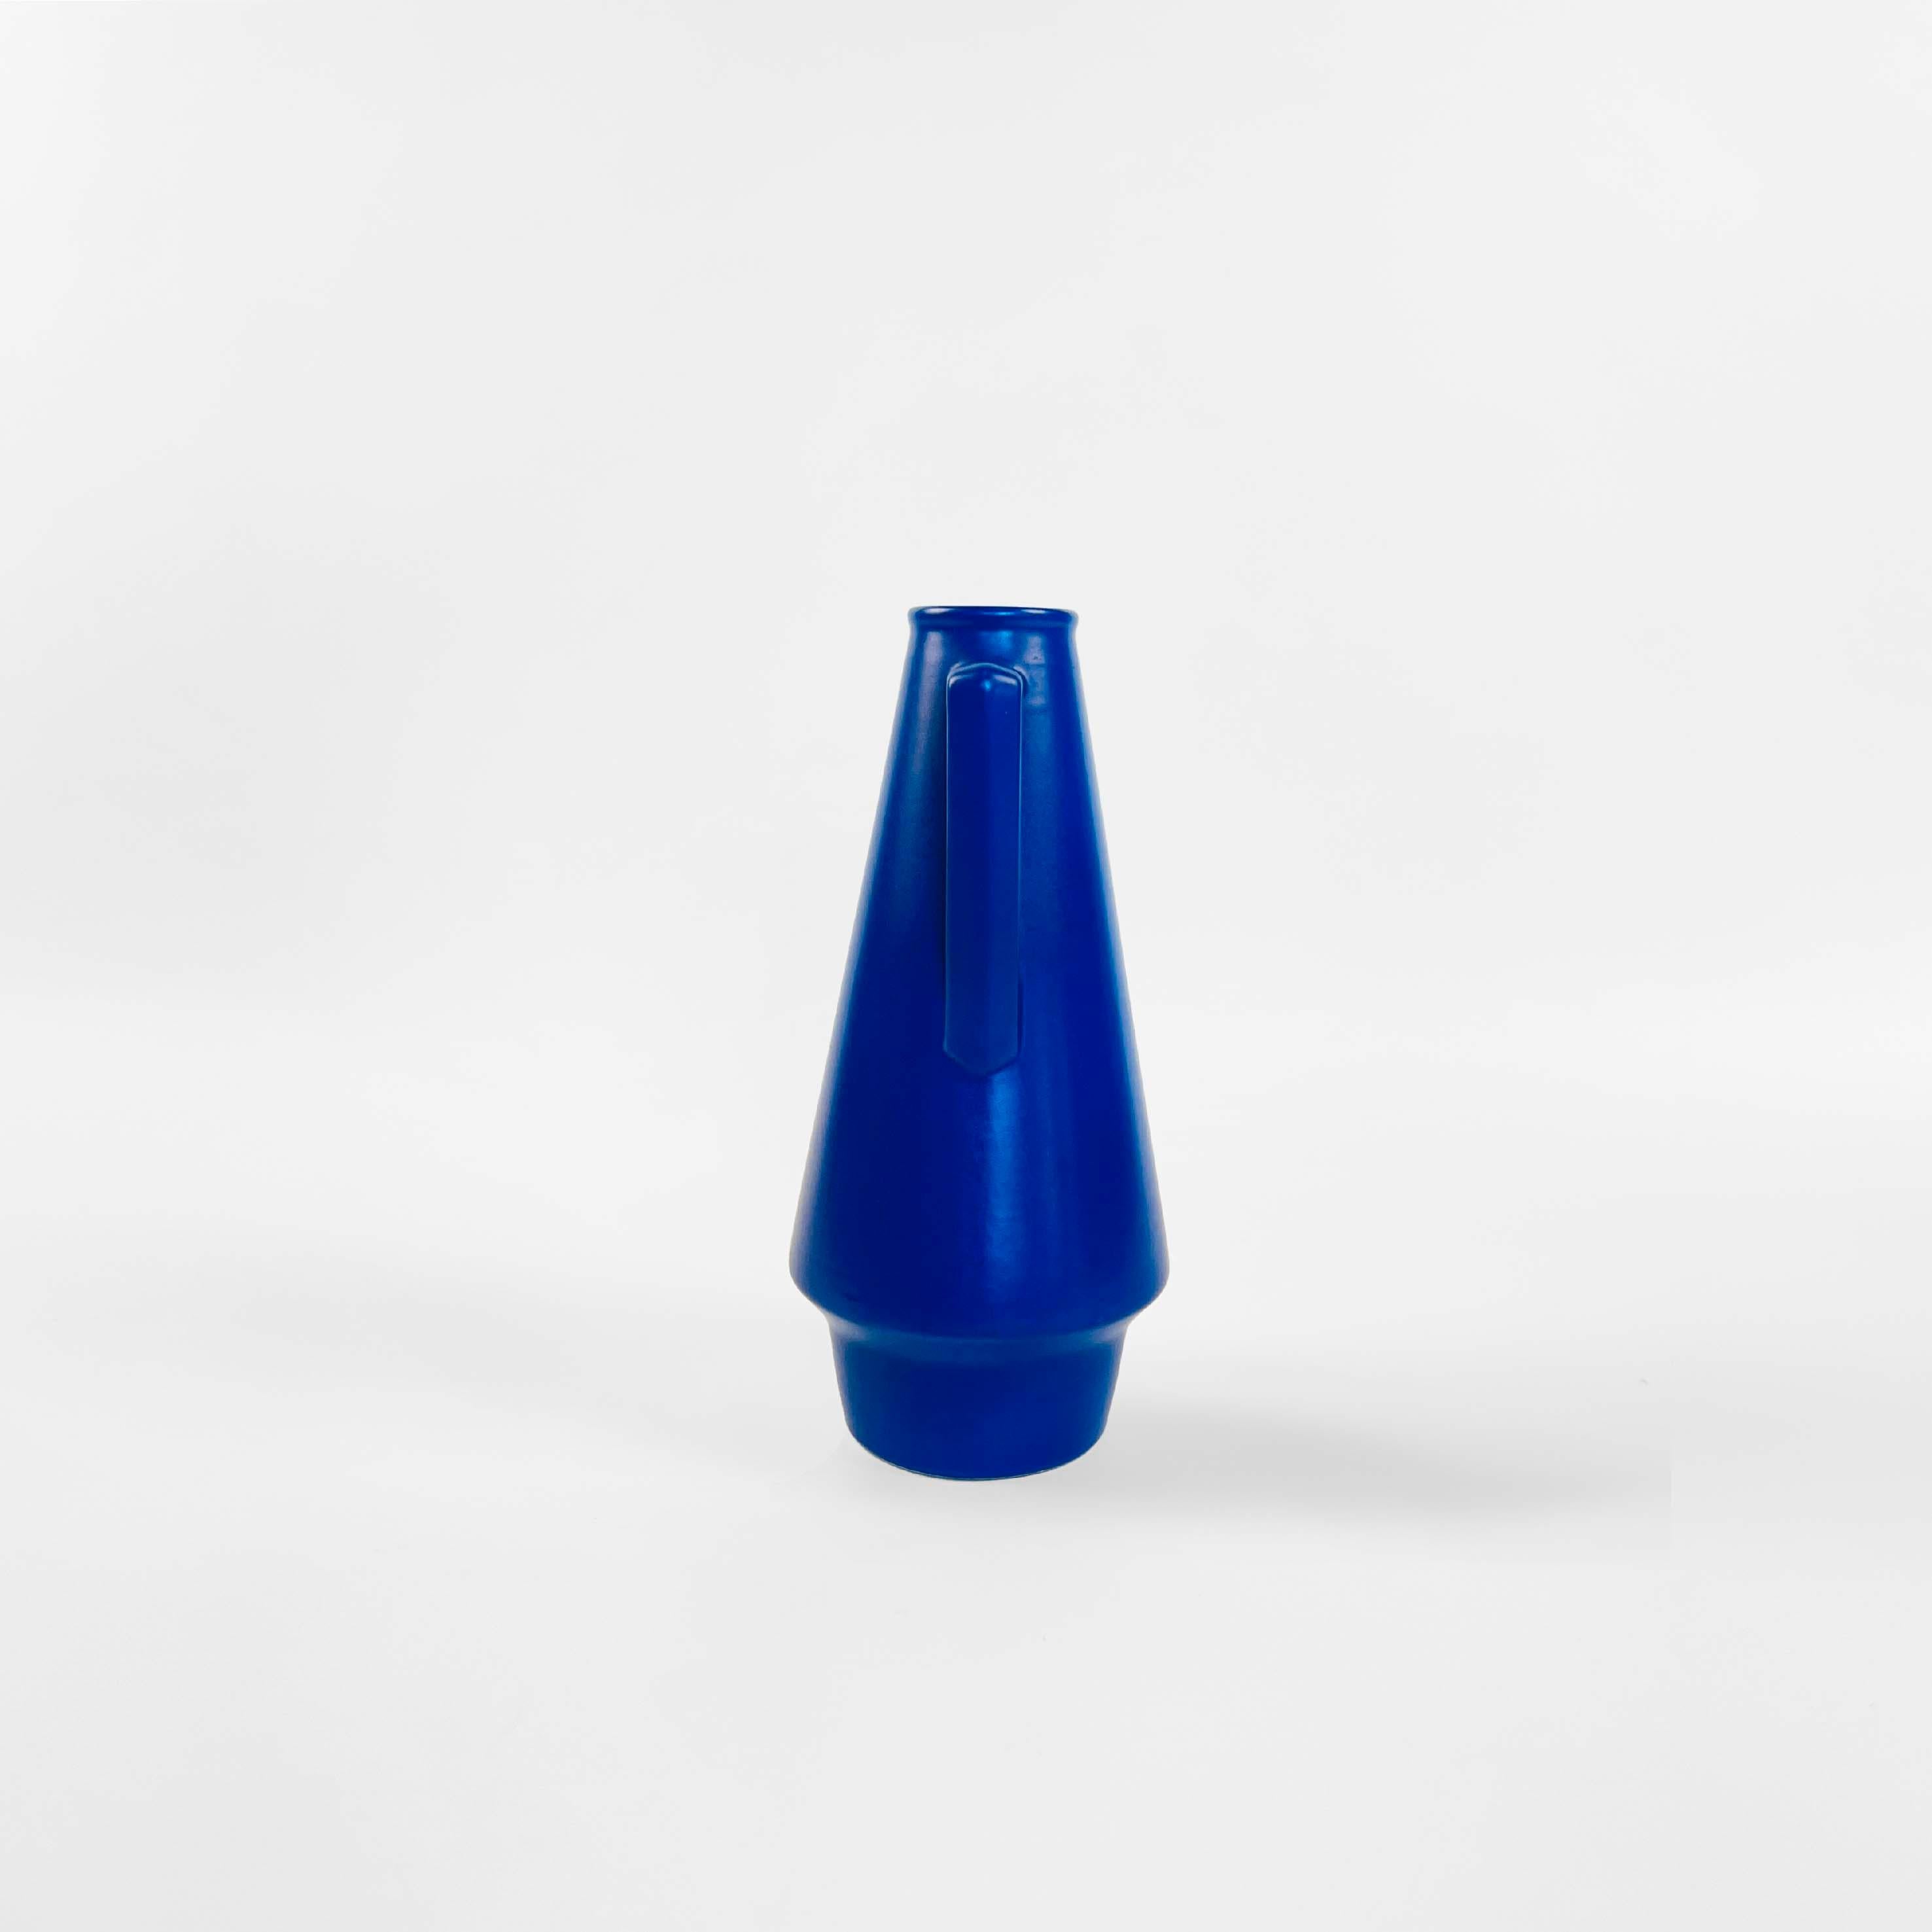 Mid-Century Modern Pottery Vase in Klein Blue, Germany, 1960s For Sale